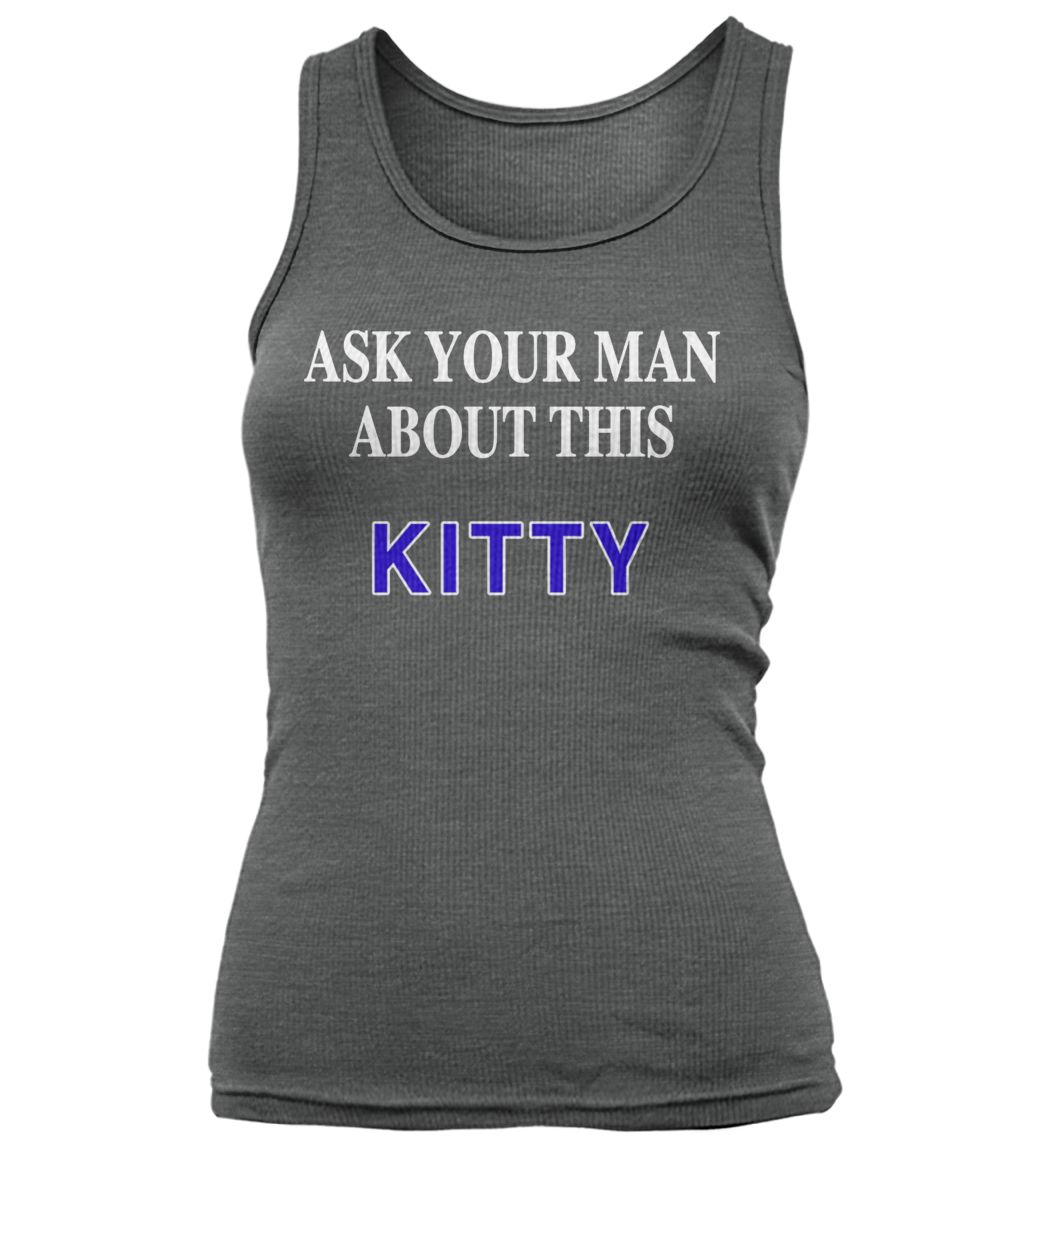 Ask your man about this kitty women's tank top